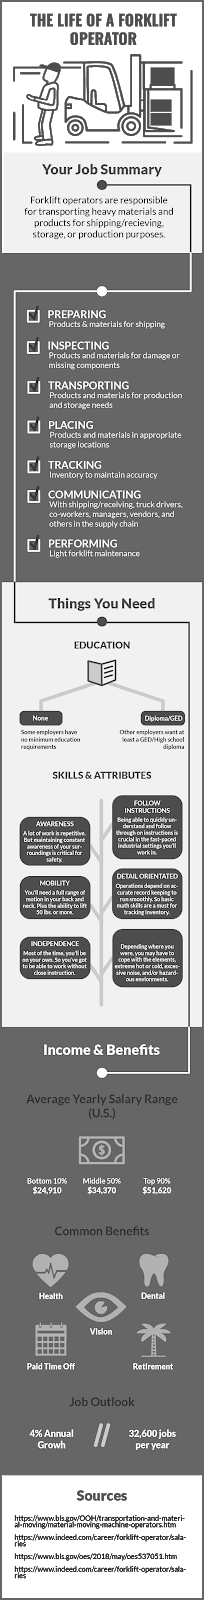 What the life of a forklift operator is like (infographic)